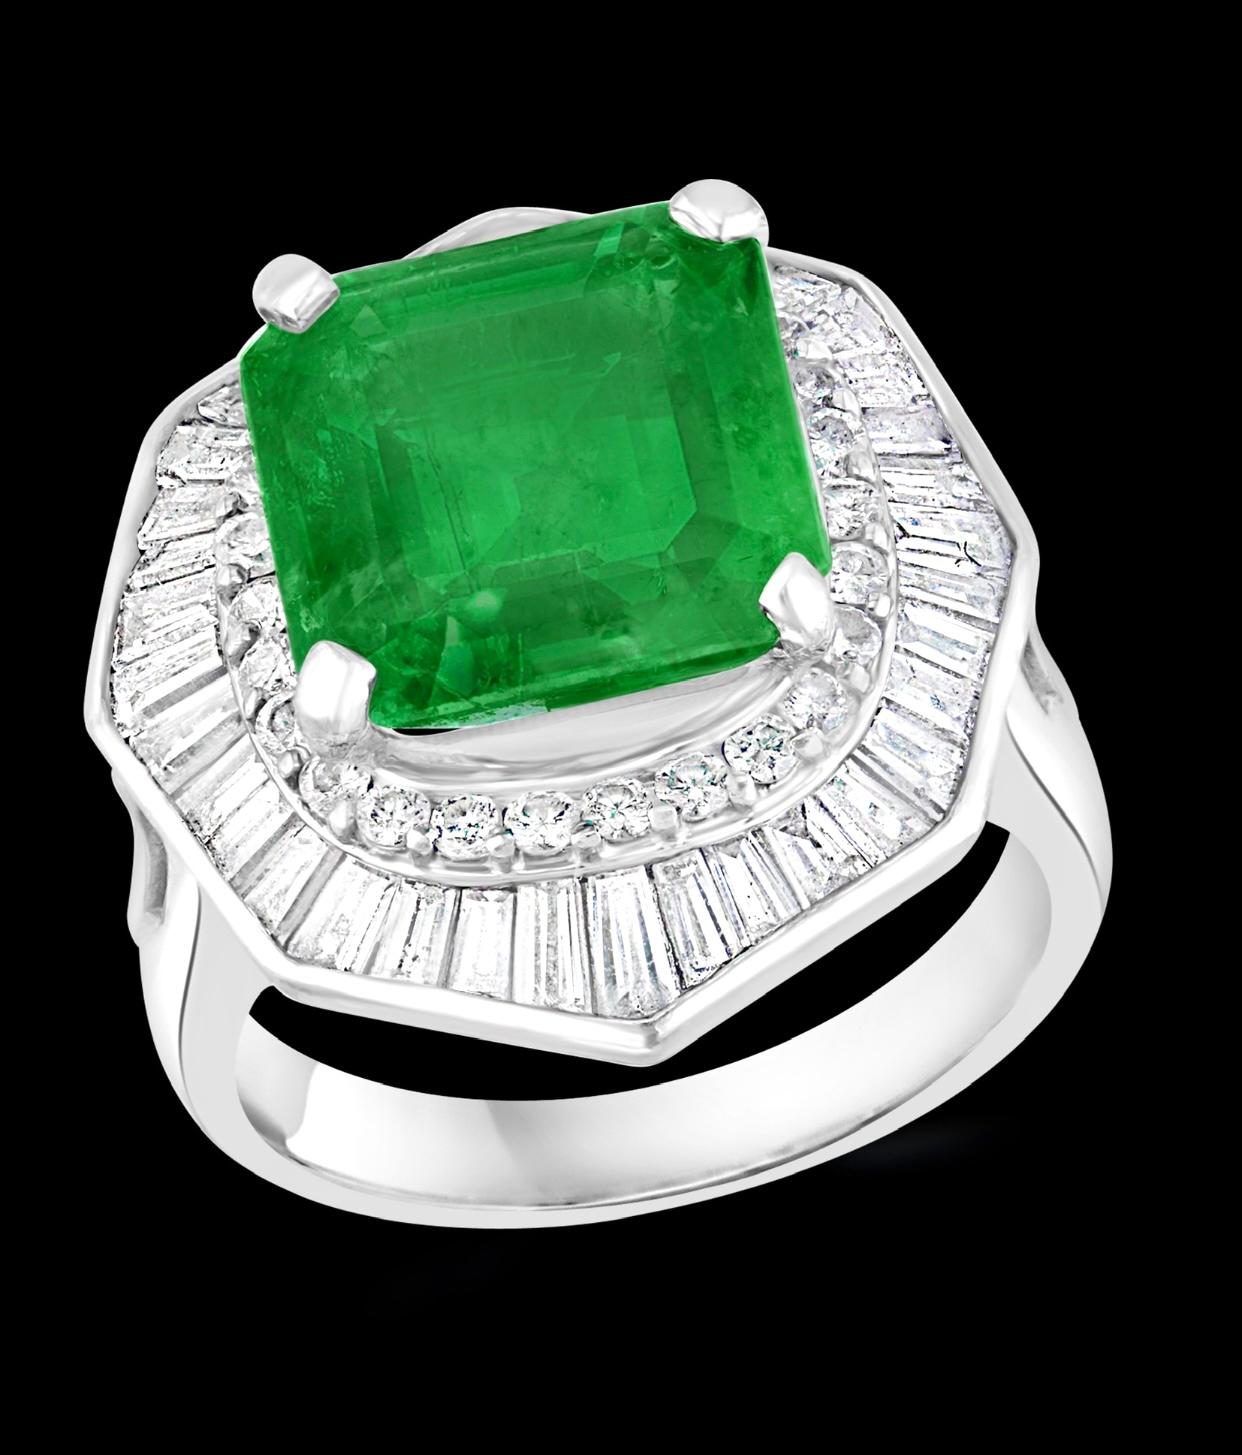 
6.5 Carat Emerald Cut Colombian Emerald & 2.4 Carat Diamond Ring Platinum Size 5
Colombian emeralds are very precious , Very Difficult to find and getting more more difficult to find.
A classic, Cocktail ring 
6.5 Carat  Colombian Emerald